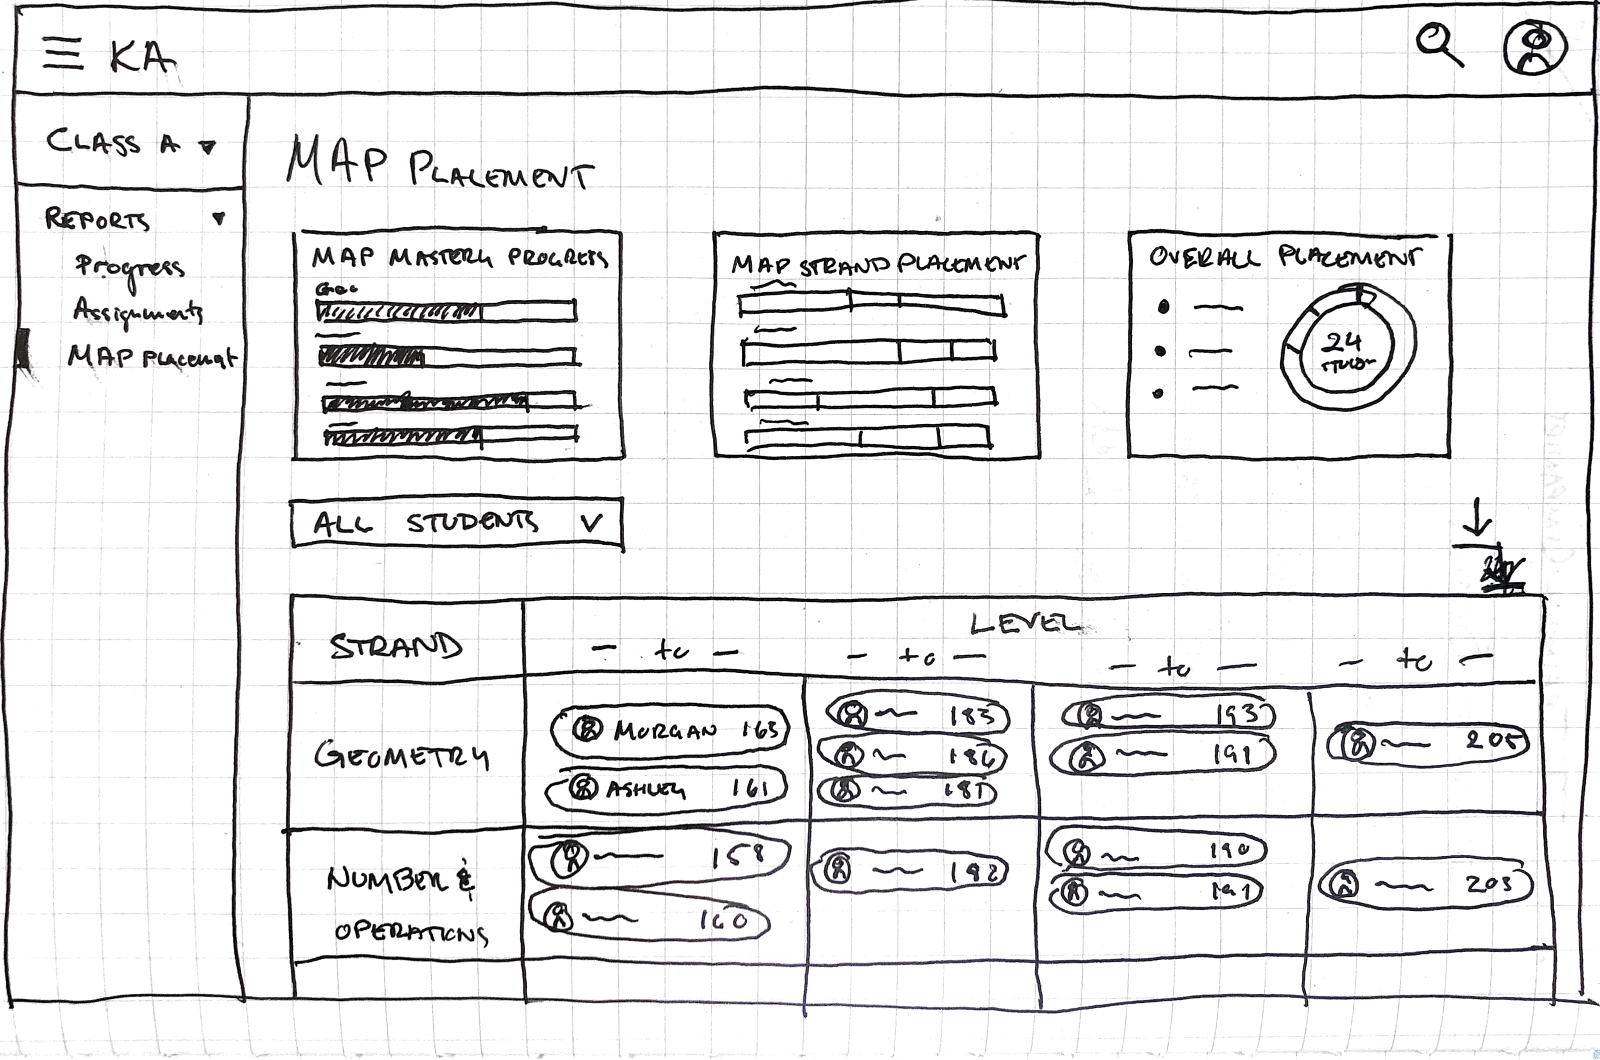 Low-fidelity wireframe of a more focused view of the placement scores